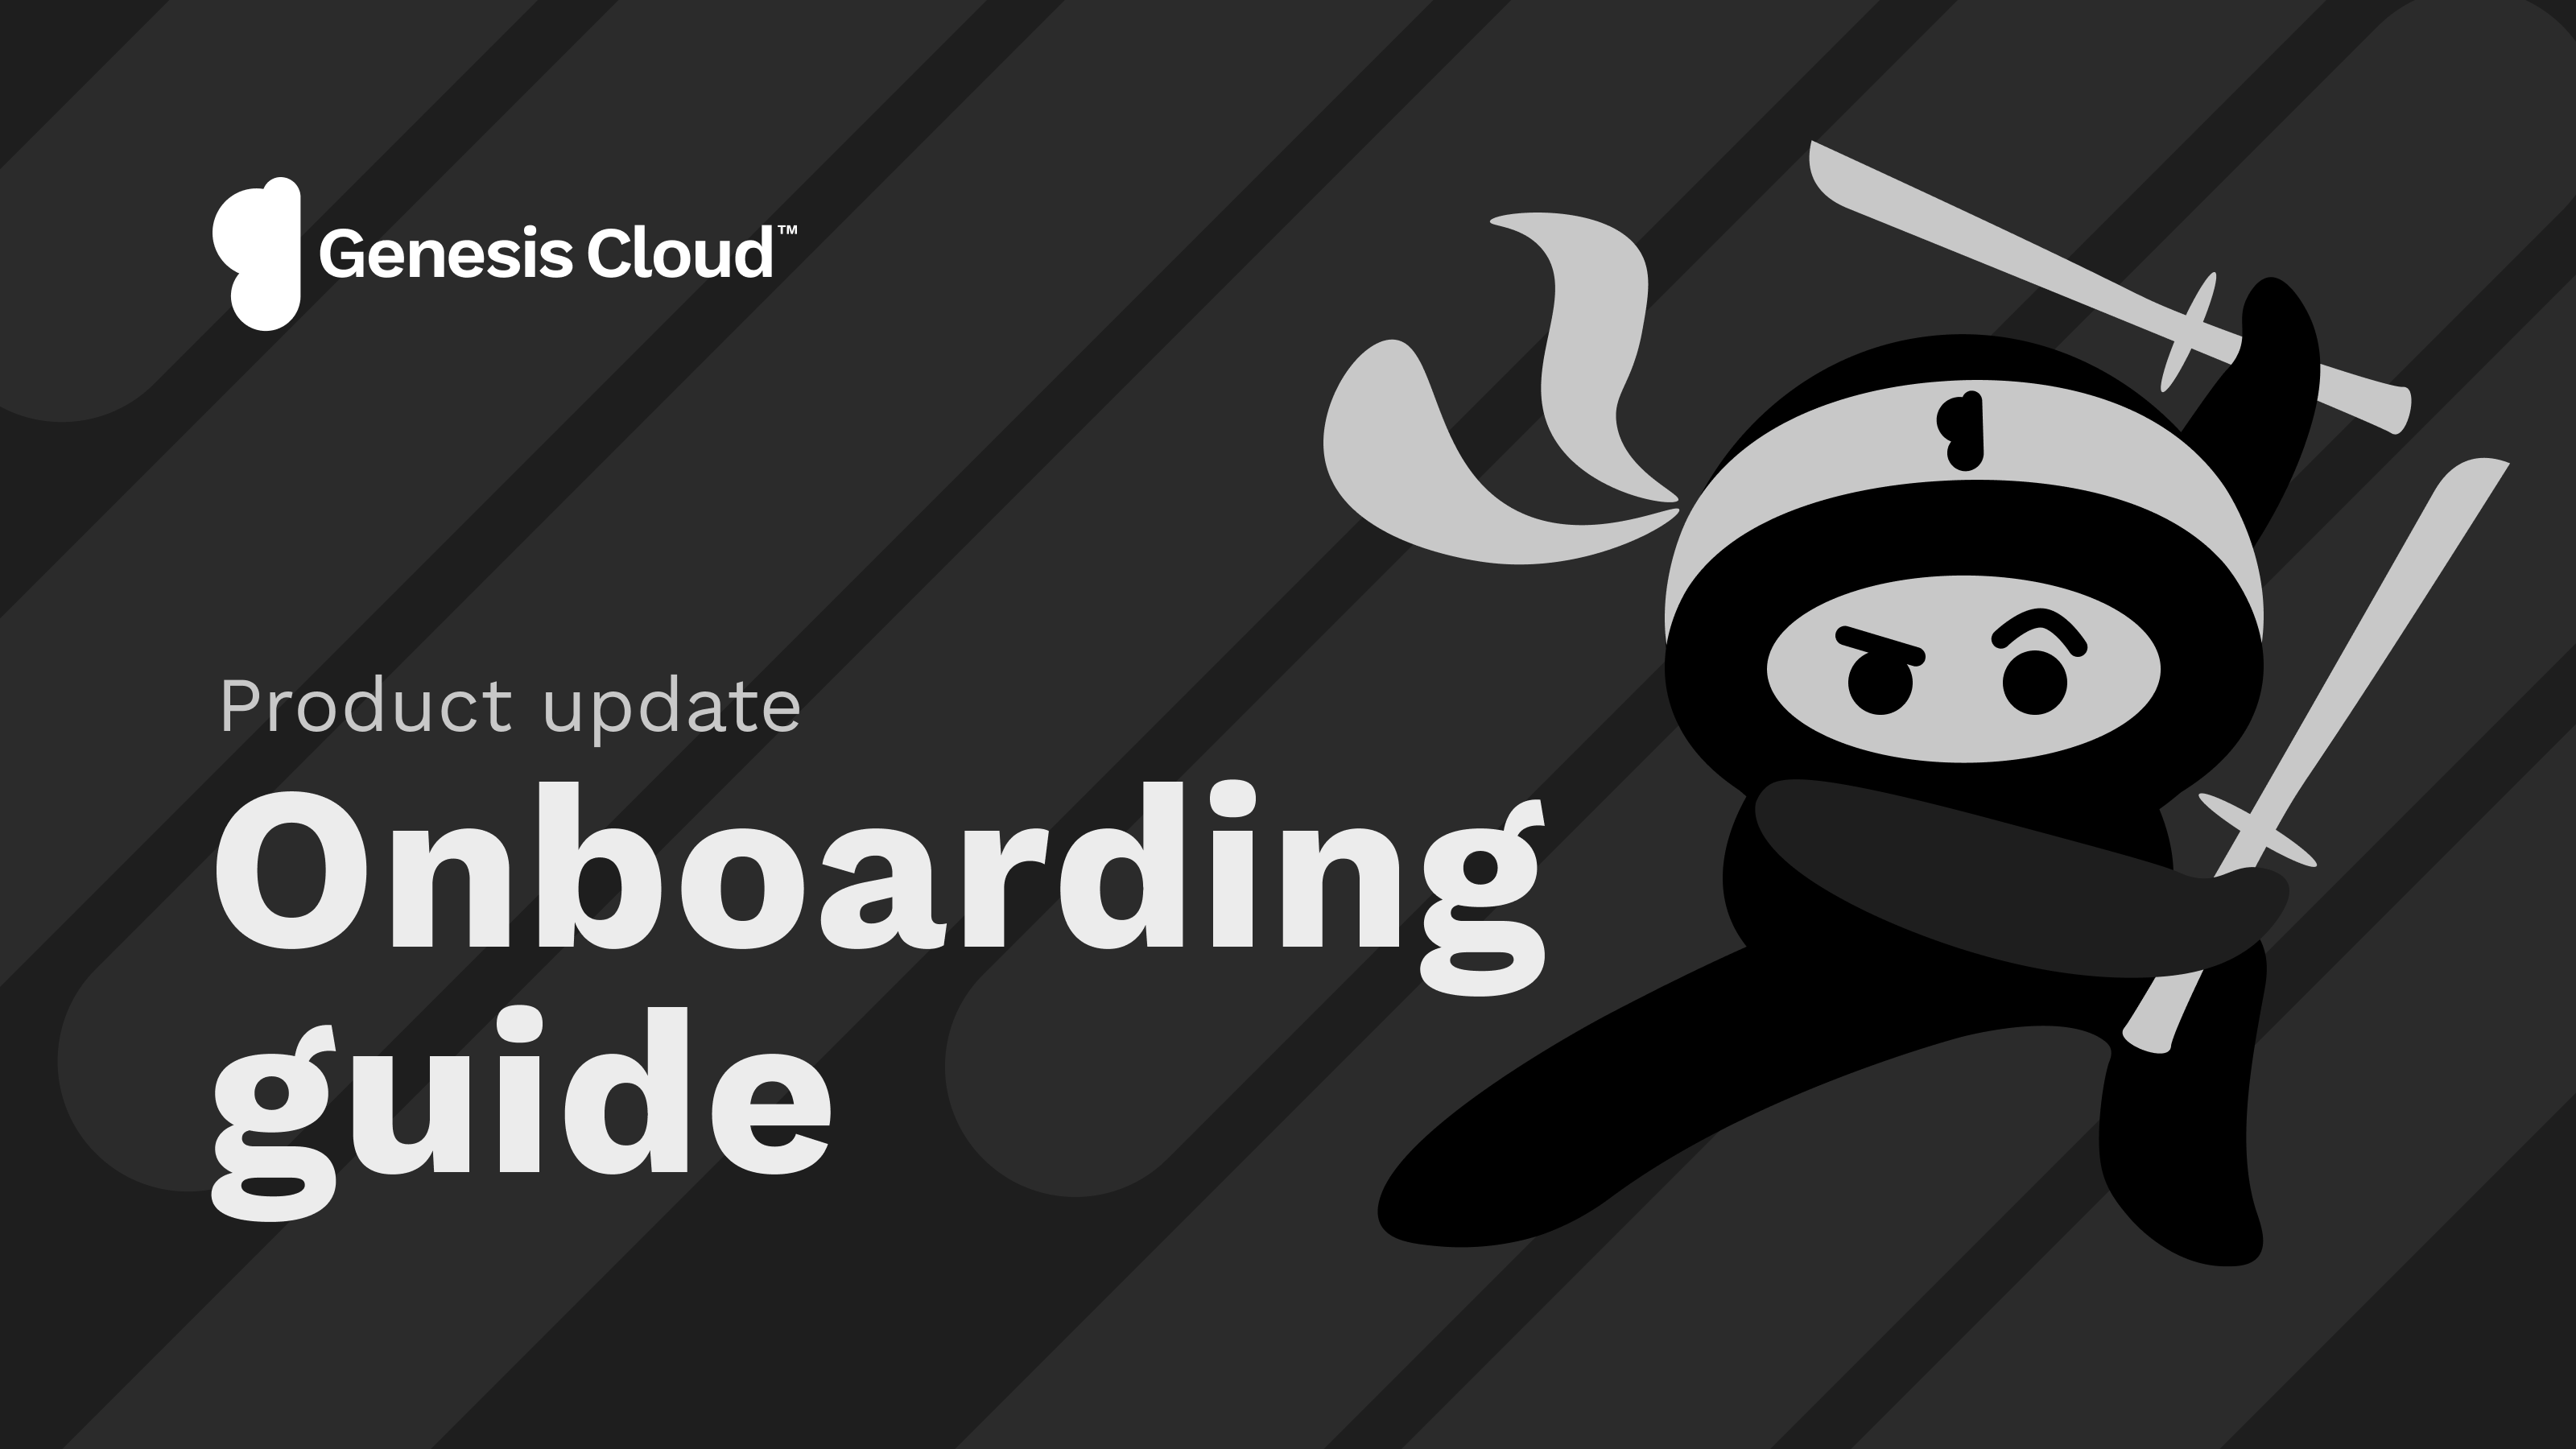 Setup your Genesis Cloud account in no time with our onboarding guide